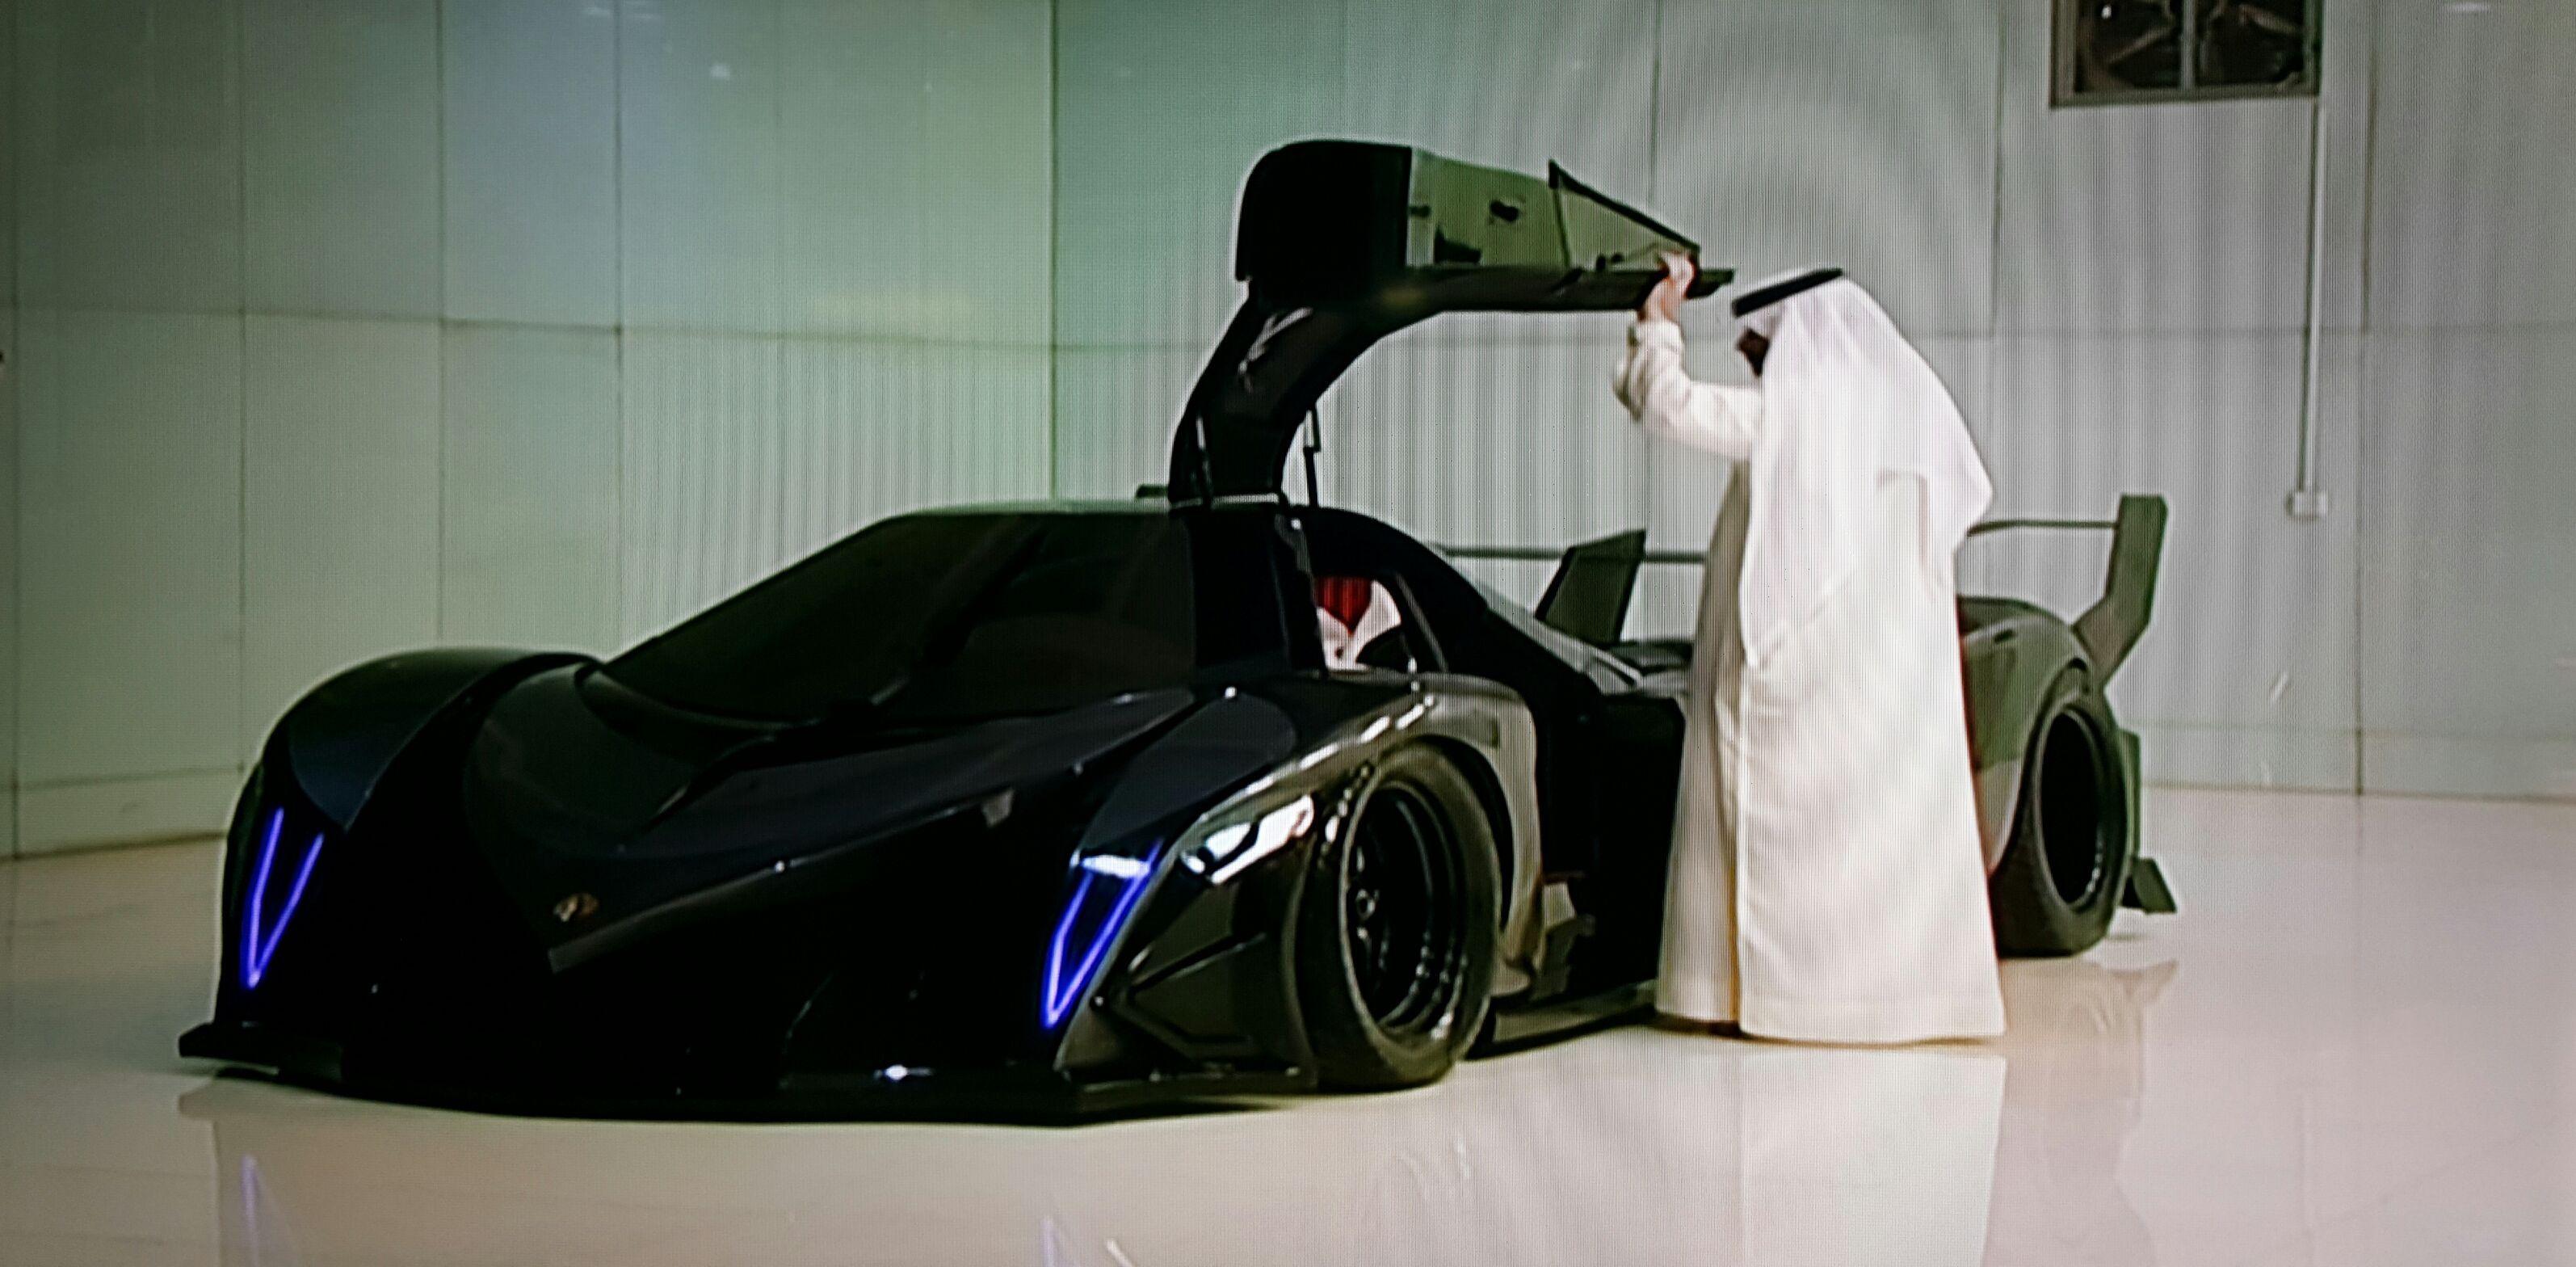 Devel Sixteen image. Why Be Normyl Motor Works